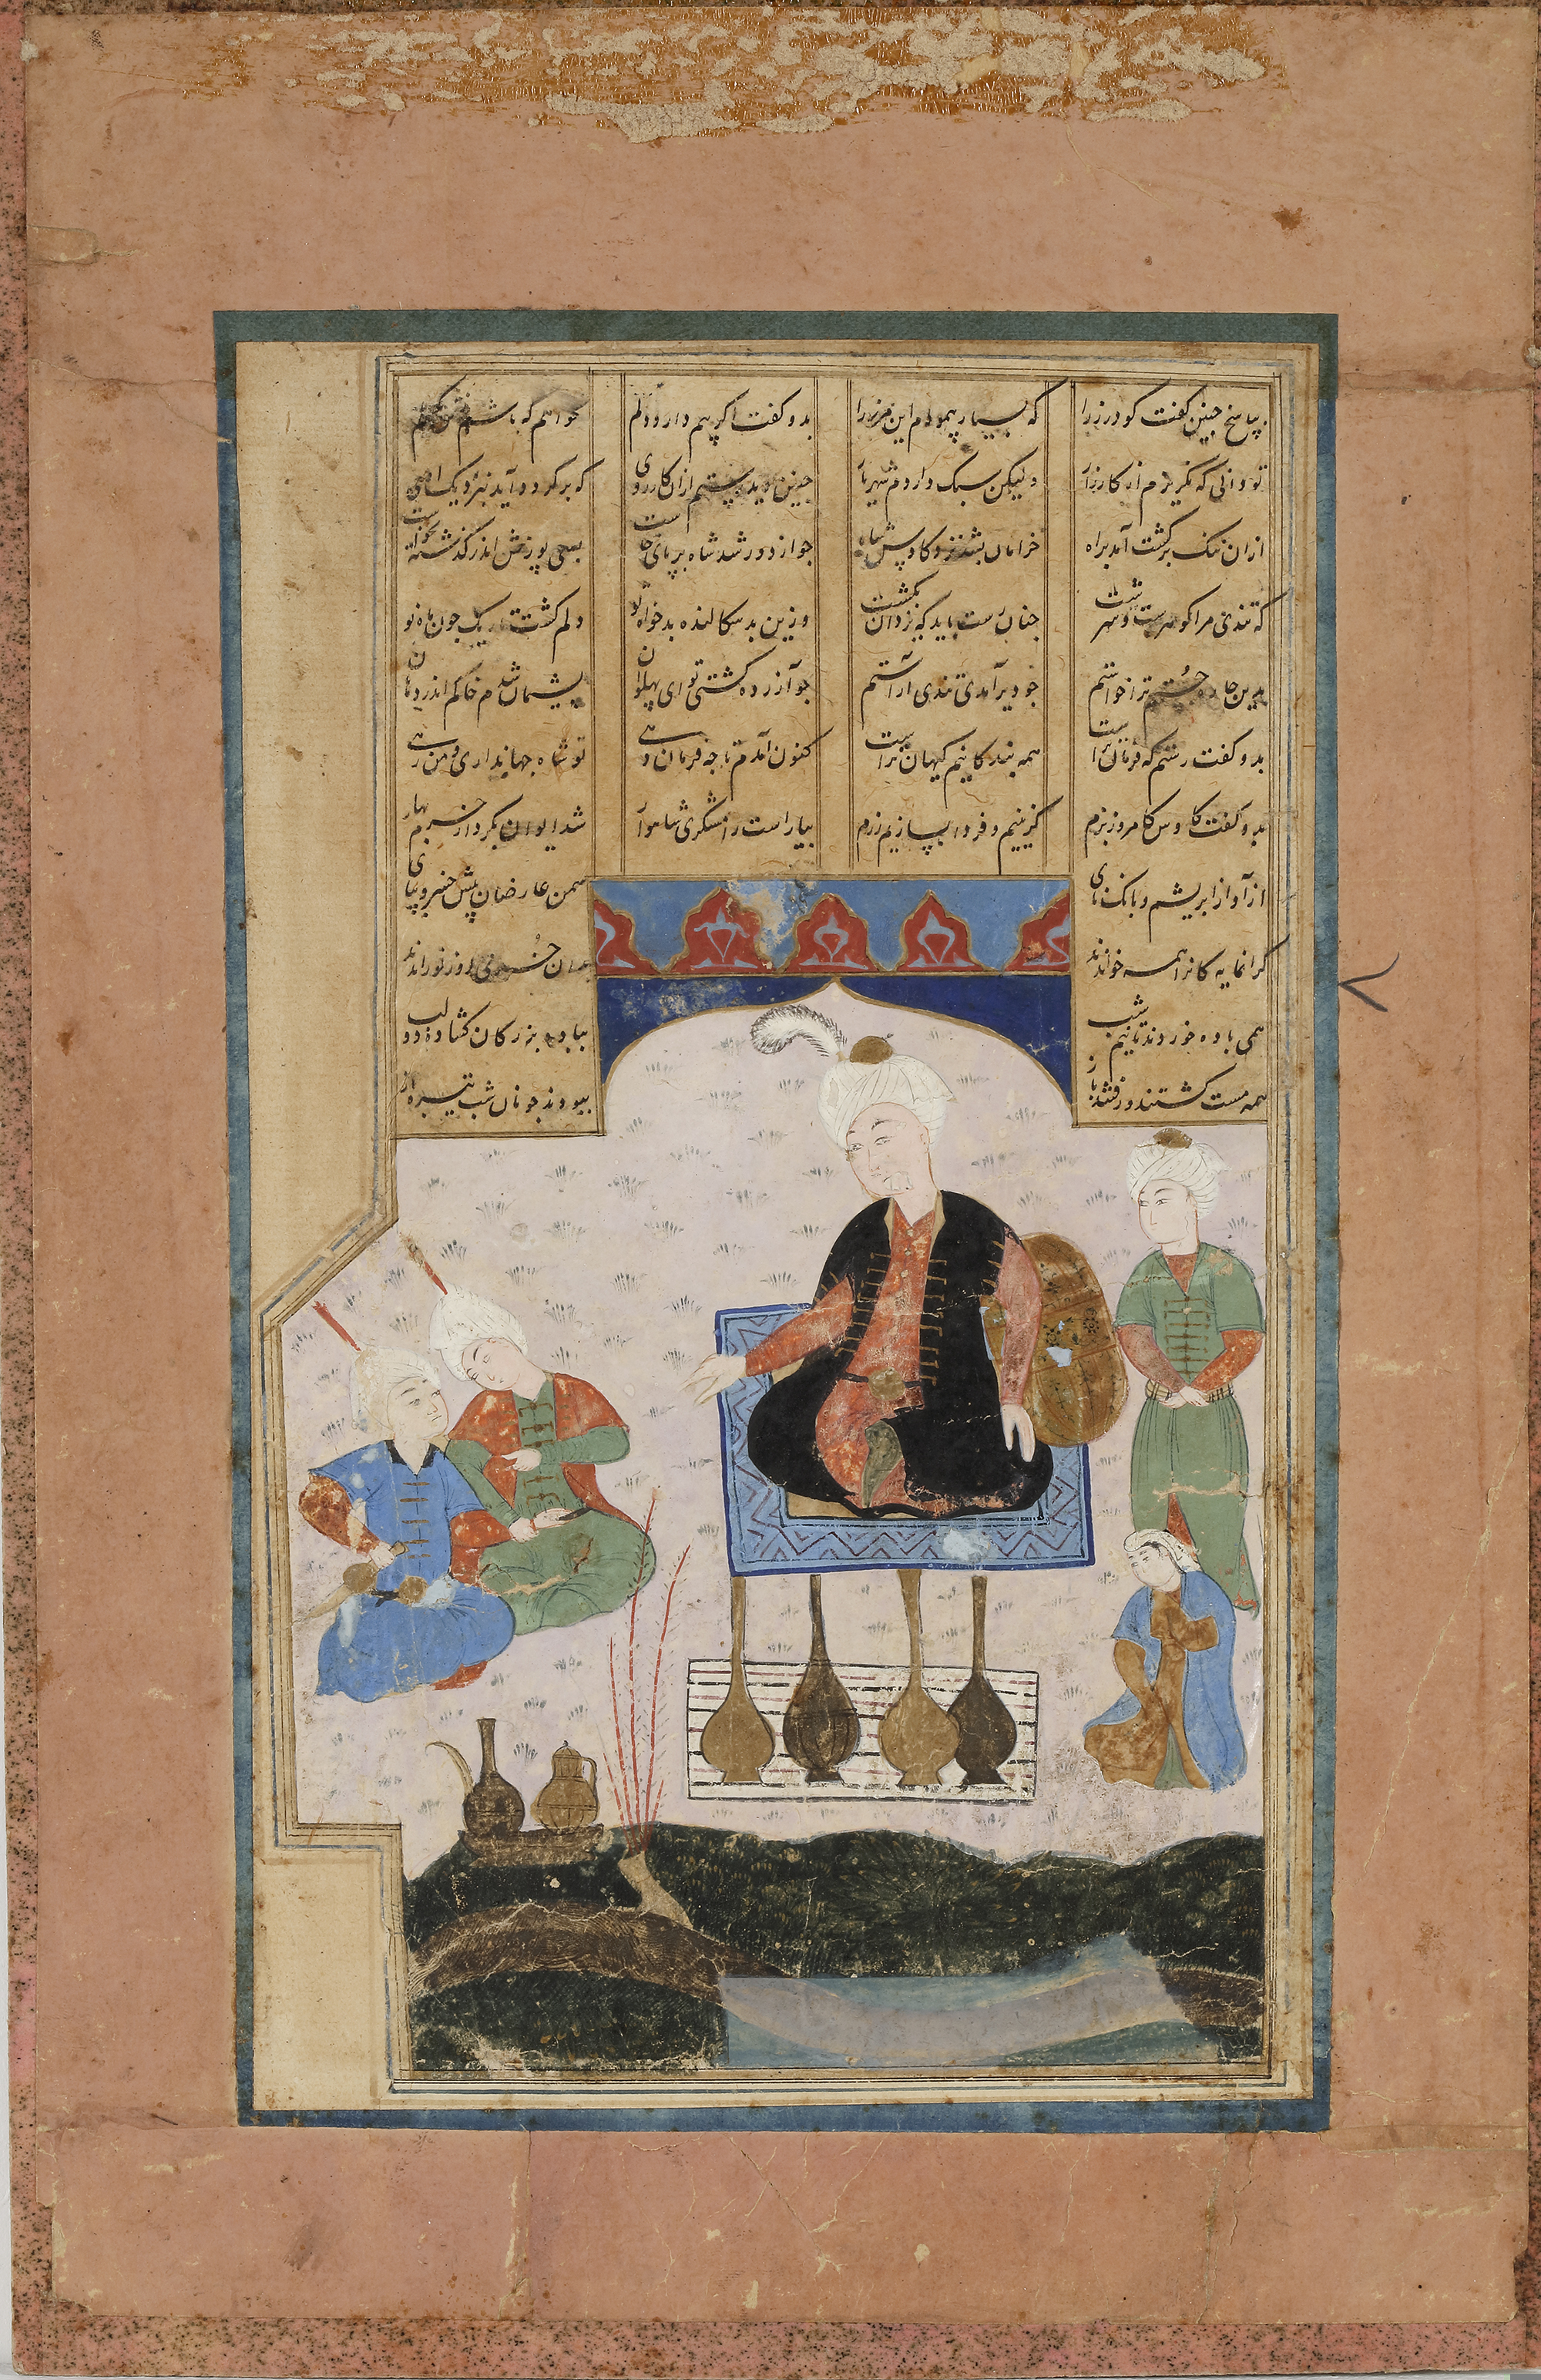 KAY KAVUS, AN ILLUMINATED TEXT LEAF FROM A SHAHNAMEH, PERSIA SAFAVID, 17TH CENTURY - Image 2 of 2